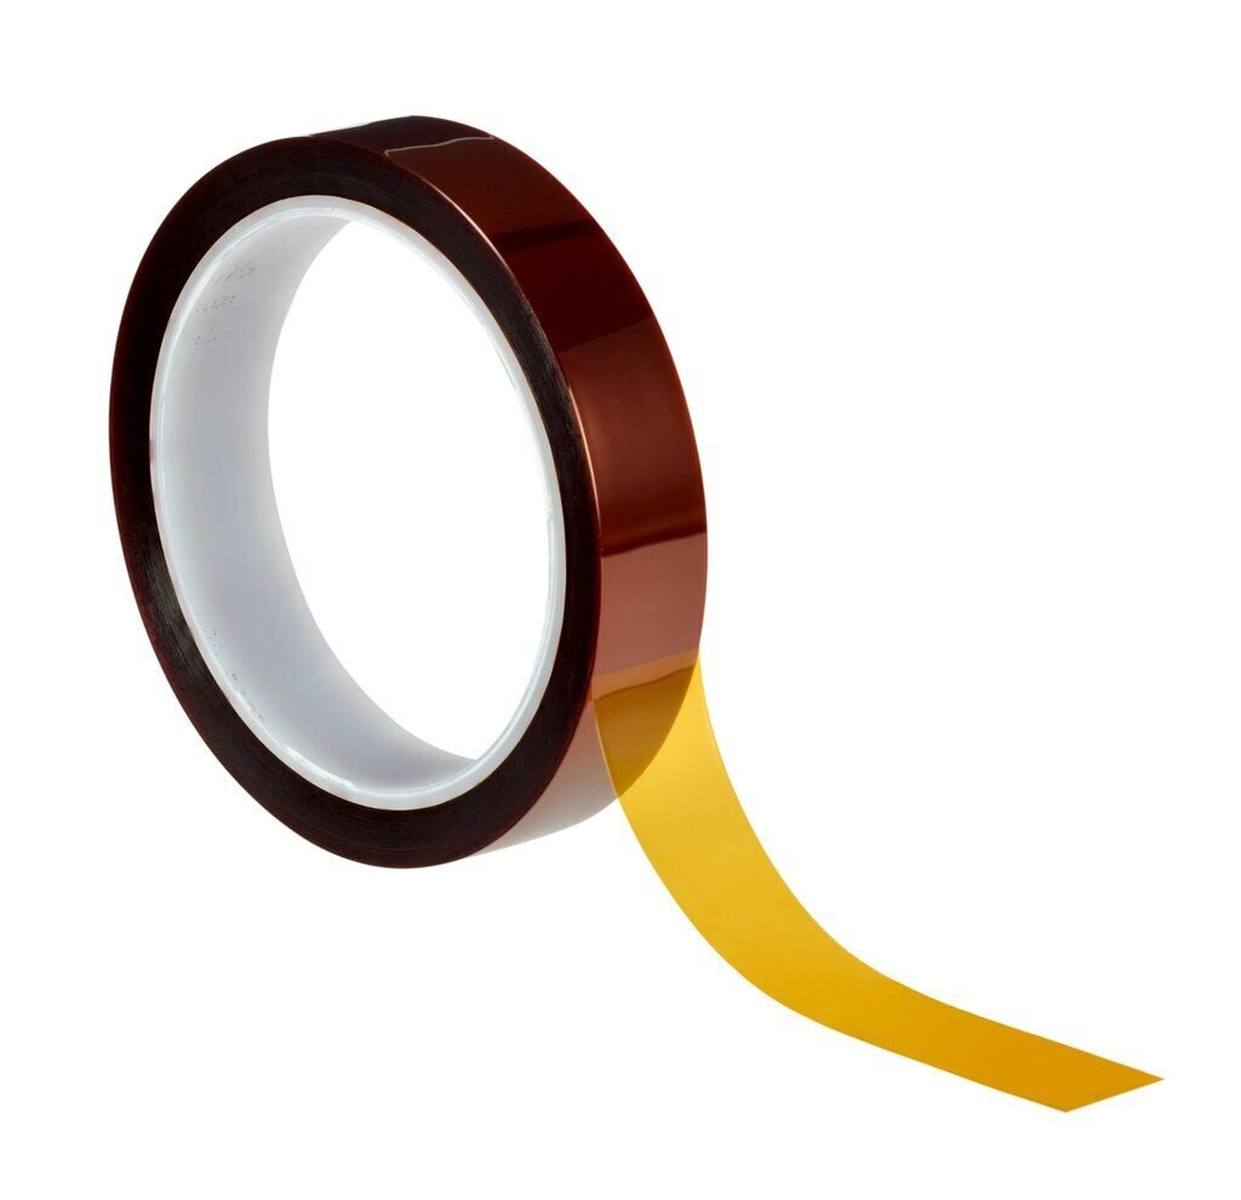 3M high temperature polyimide adhesive tape 5413, brown, 457.2 mm x 33 m, 68.58 µm